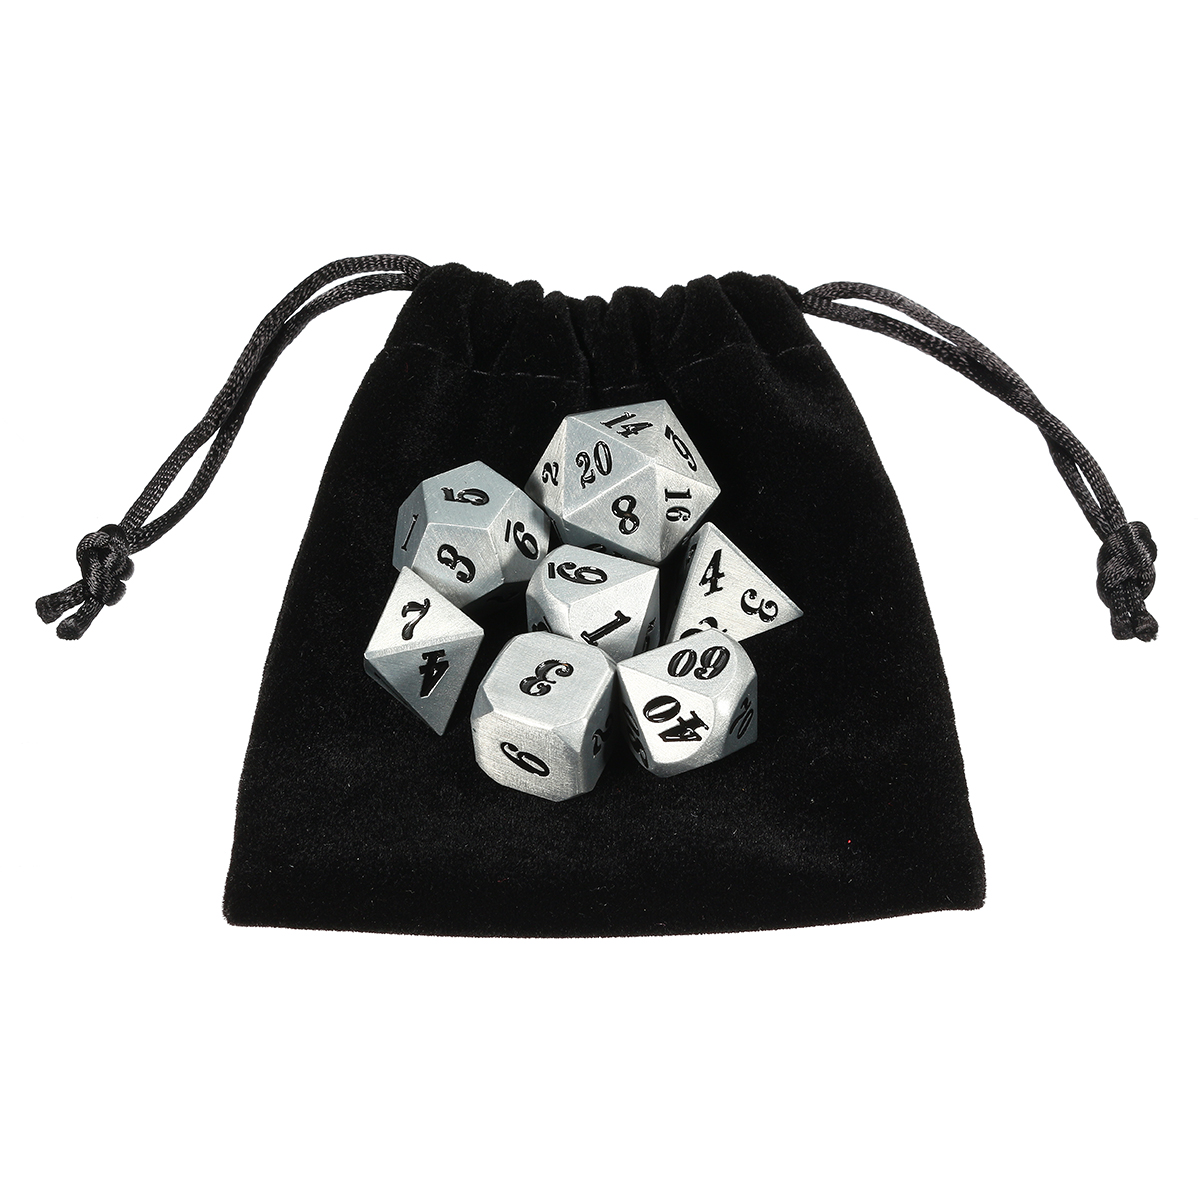 7Pc-Solid-Metal-Heavy-Dice-Set-Polyhedral-Dices-Role-Playing-Games-Dice-Gadget-RPG-1391316-3